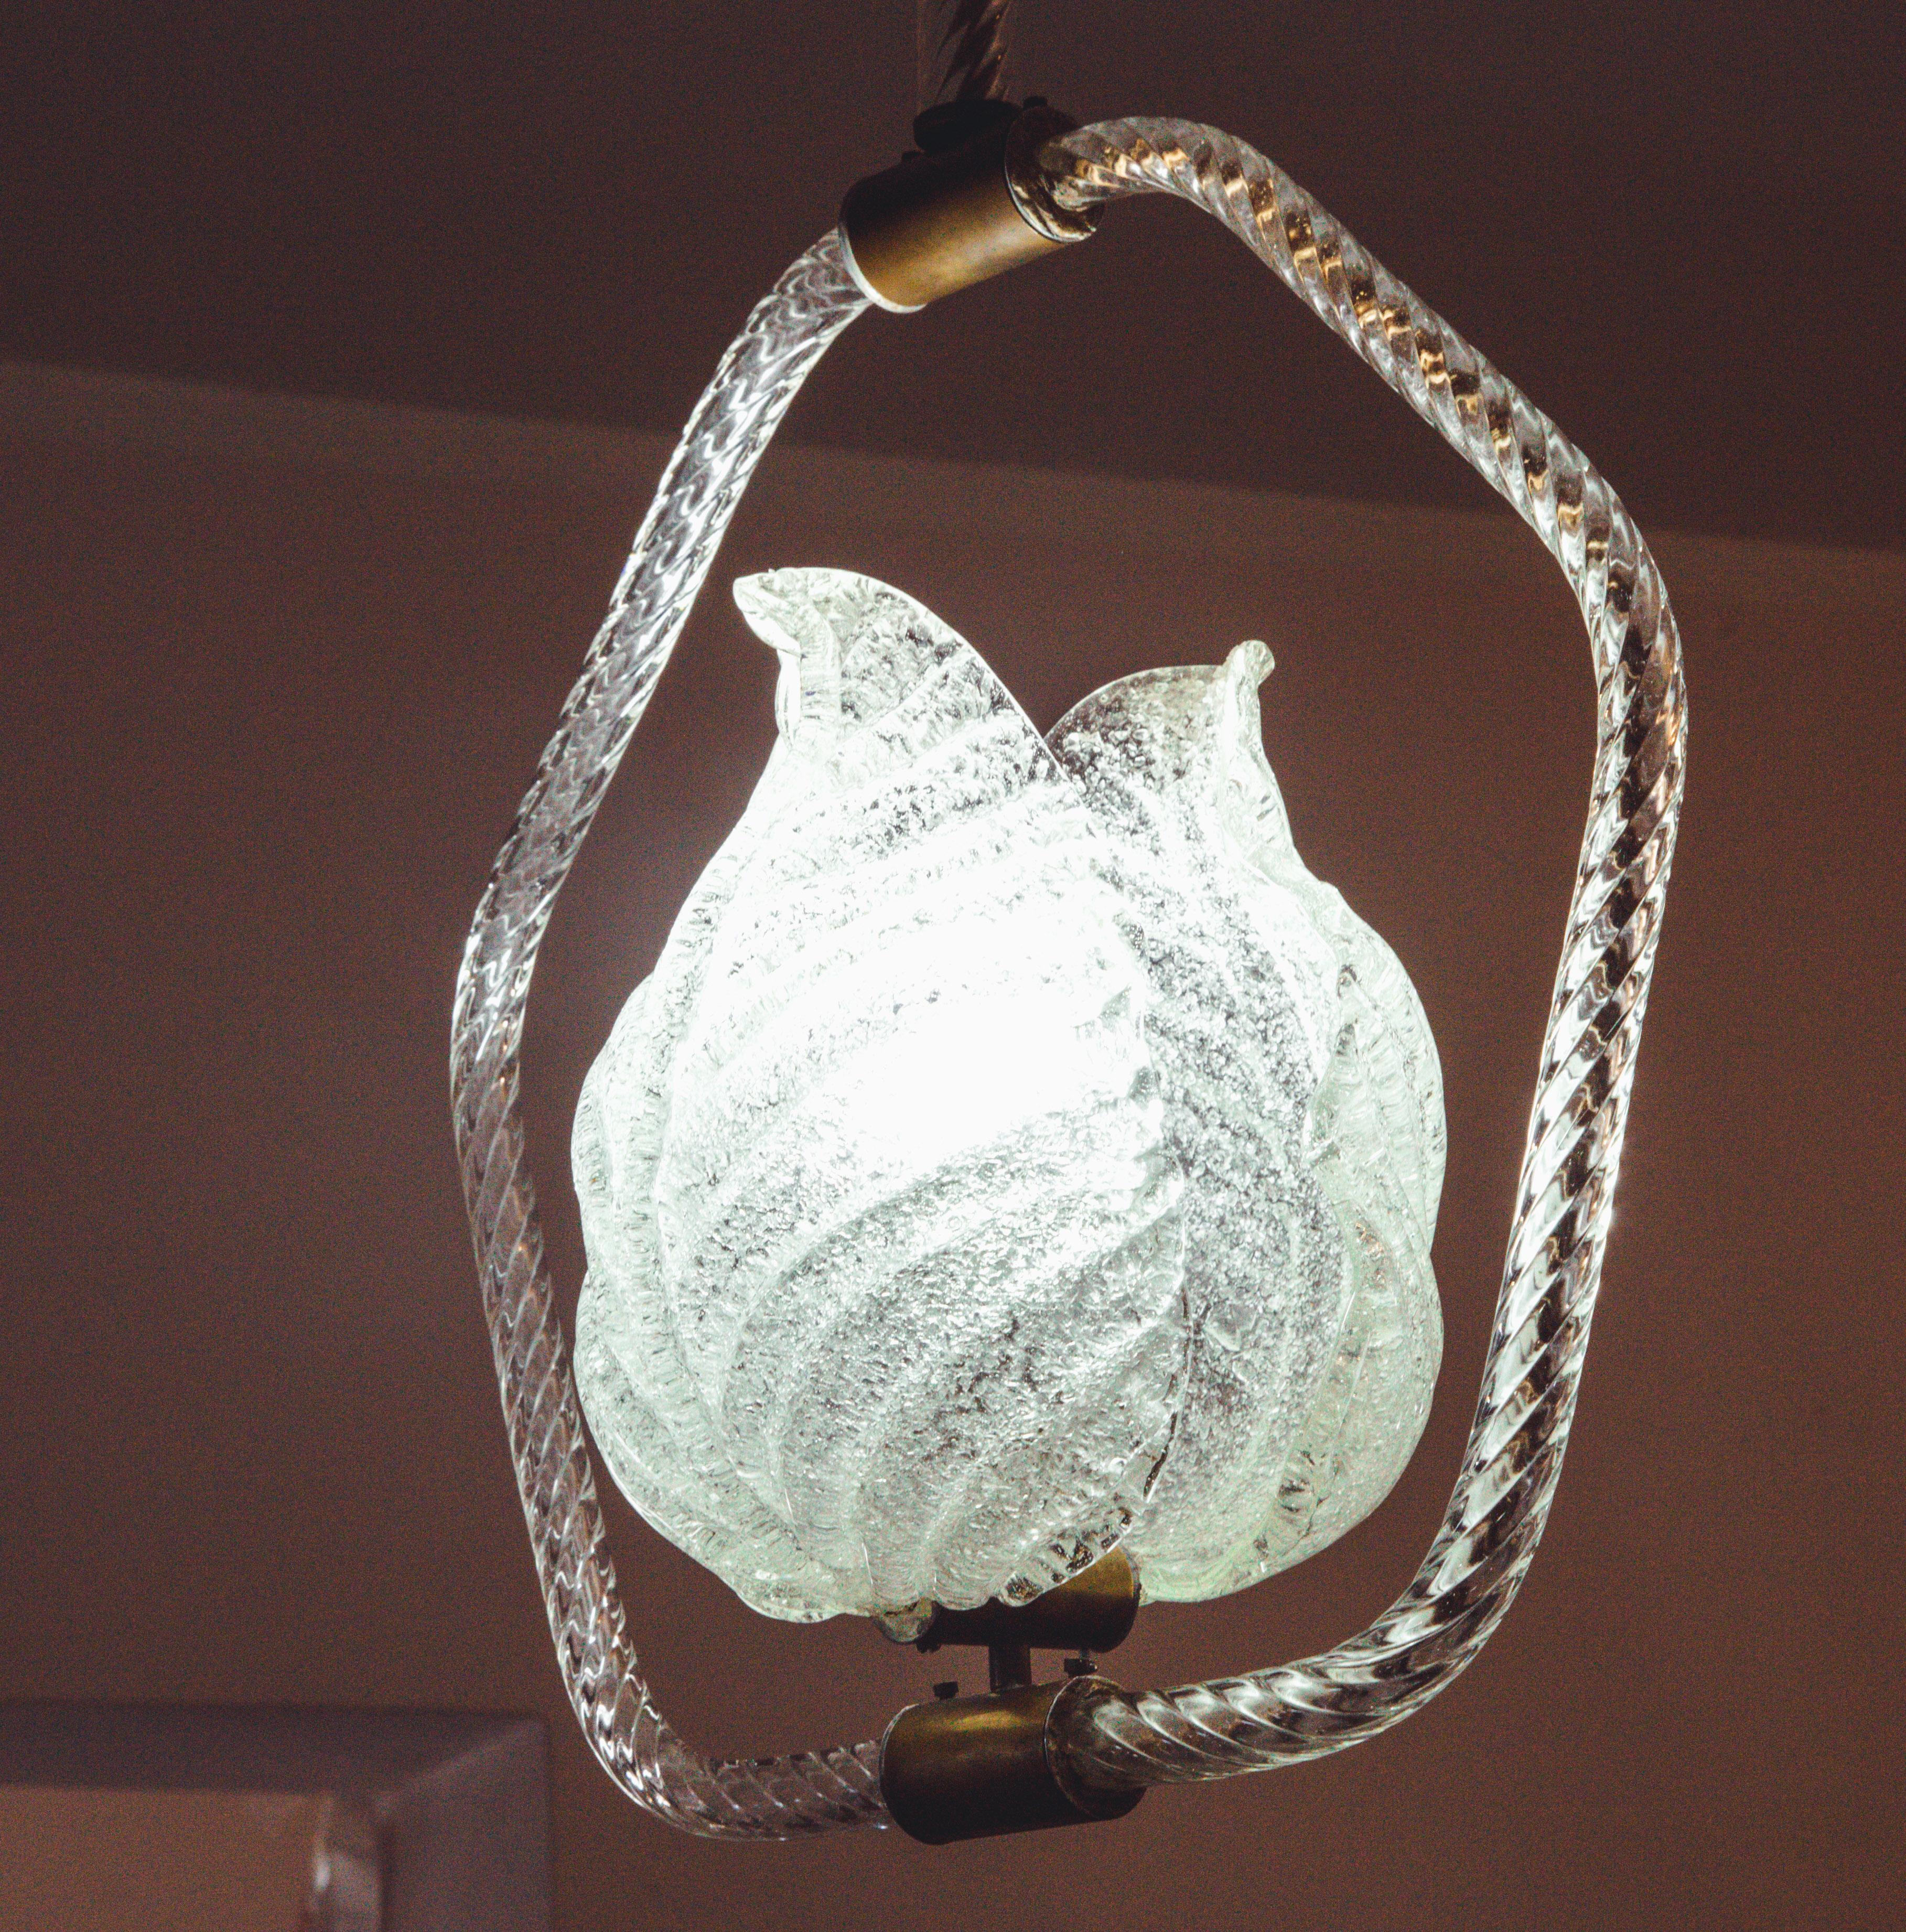 Wonderful Pair of Barovier and Toso Light Pendant, Murano Glass, 1950s For Sale 6